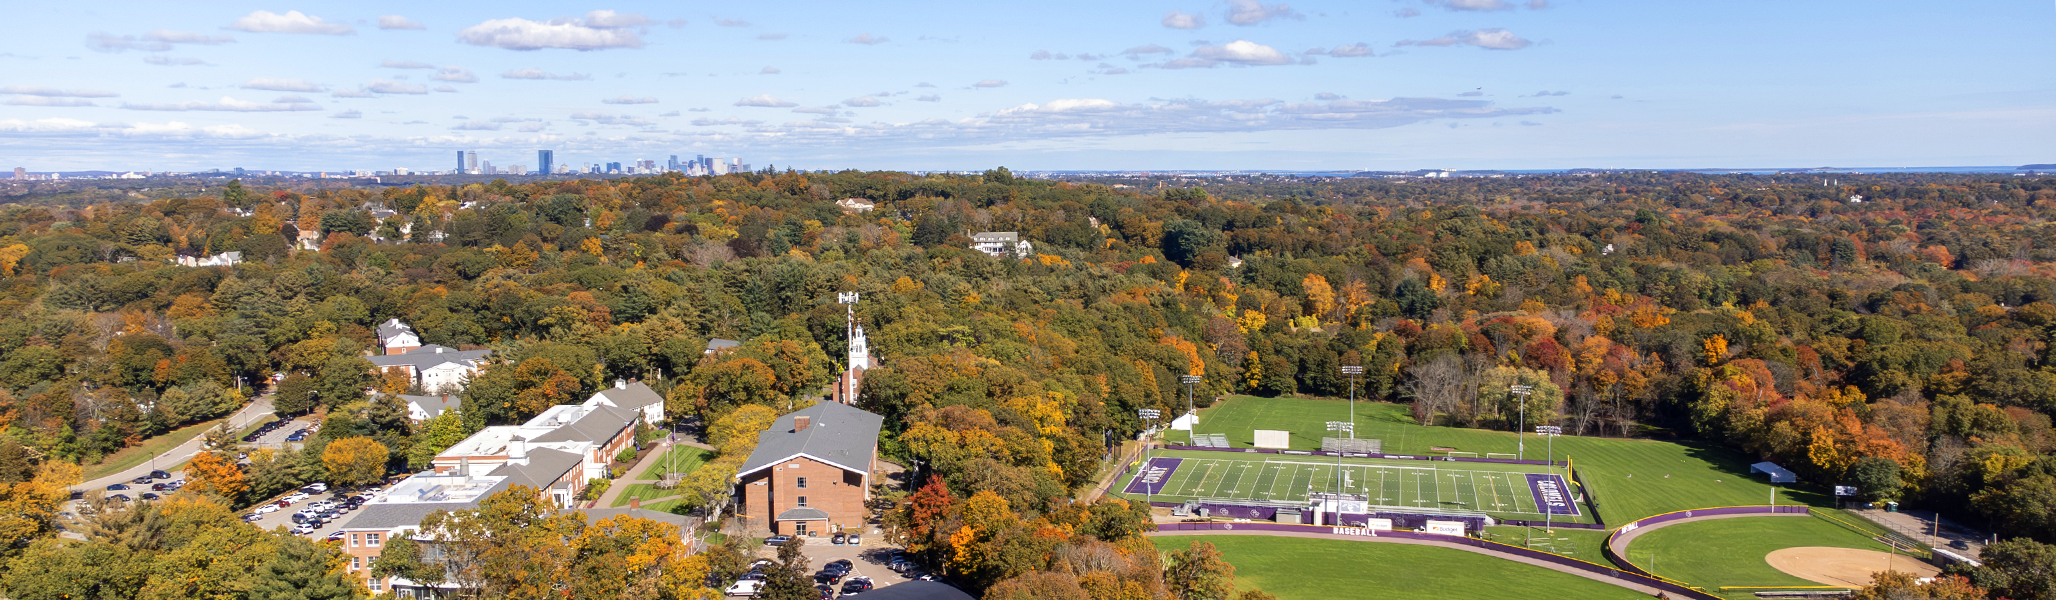 Curry College Campus from Above